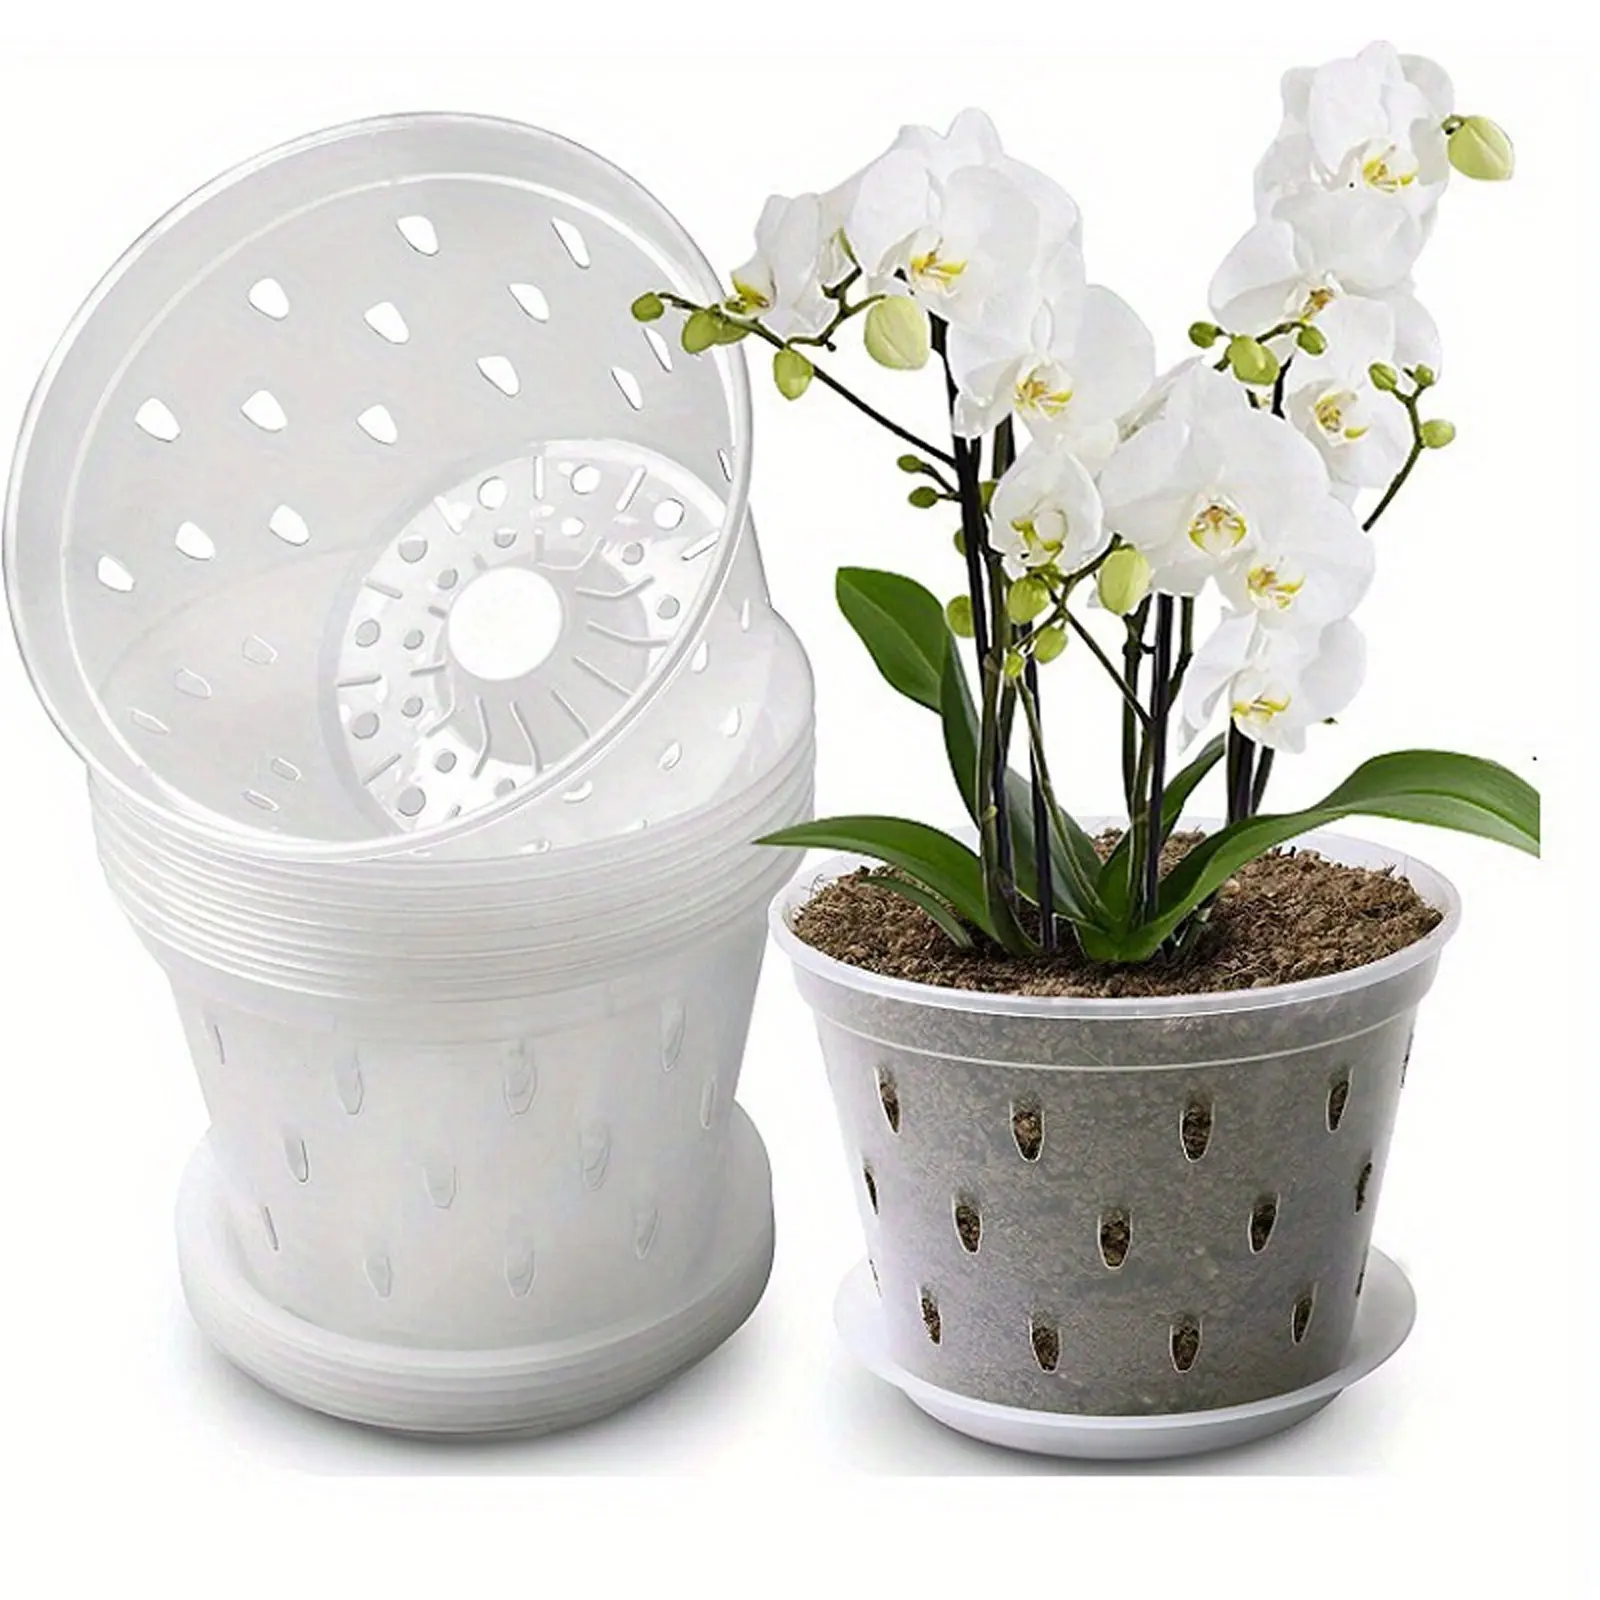 14cm Root Control Transparent Flower Pot For Phalaenopsis Orchid Cattleya Planting With Stomata Flower Pot For Home Garden